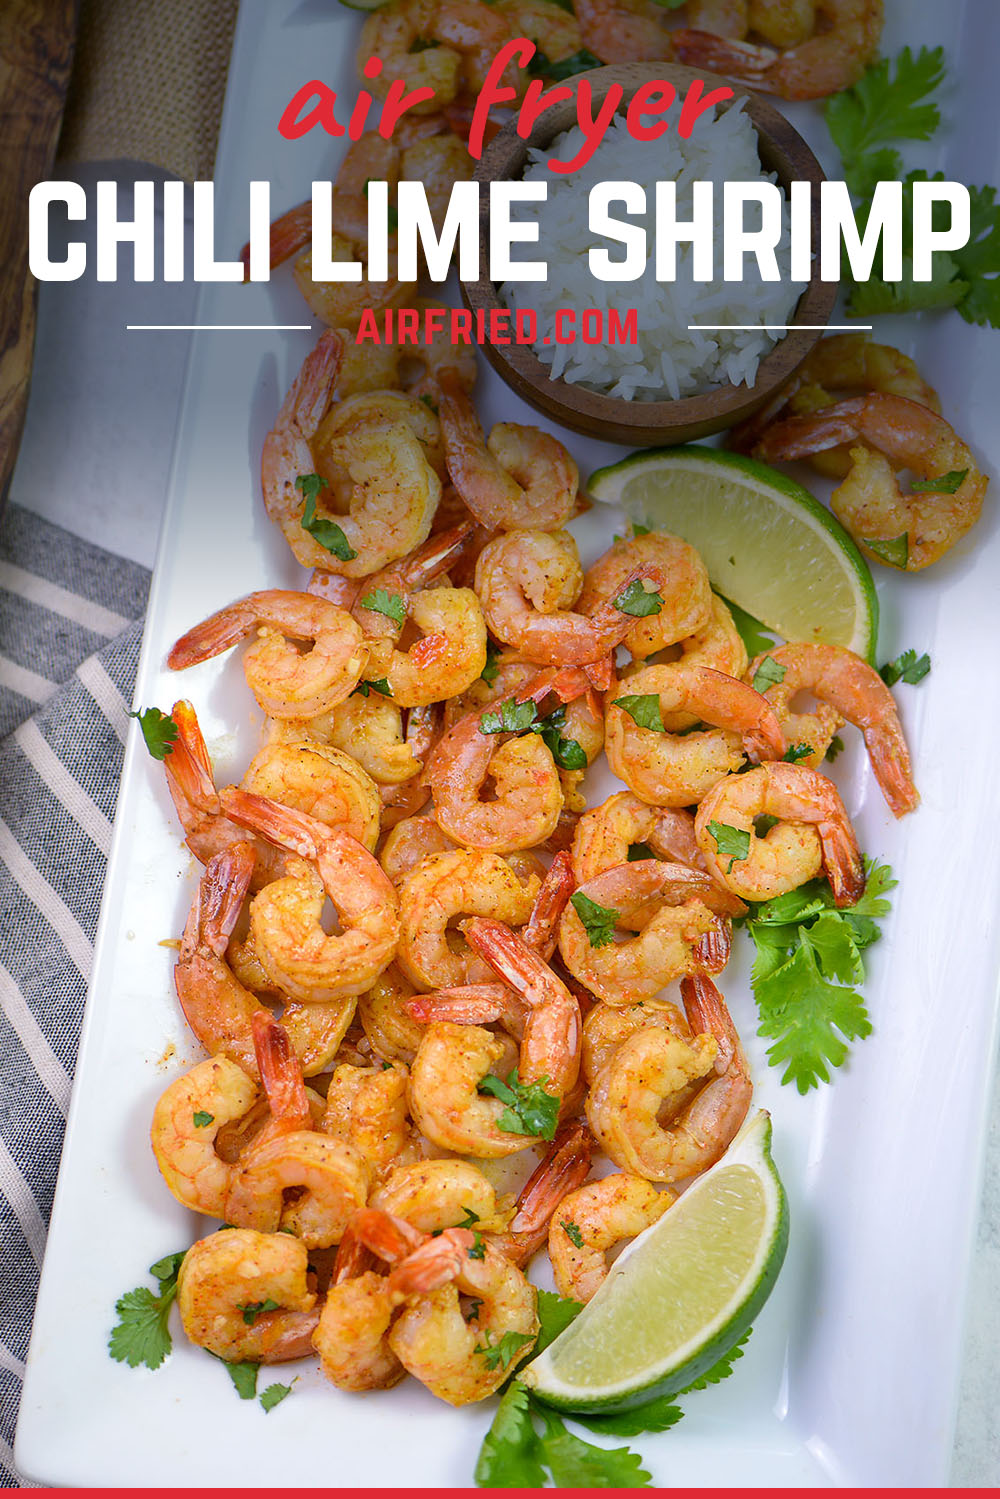 This chili lime shrimp recipes is made with a homemade chili lime sauce and cooked in the recipe.